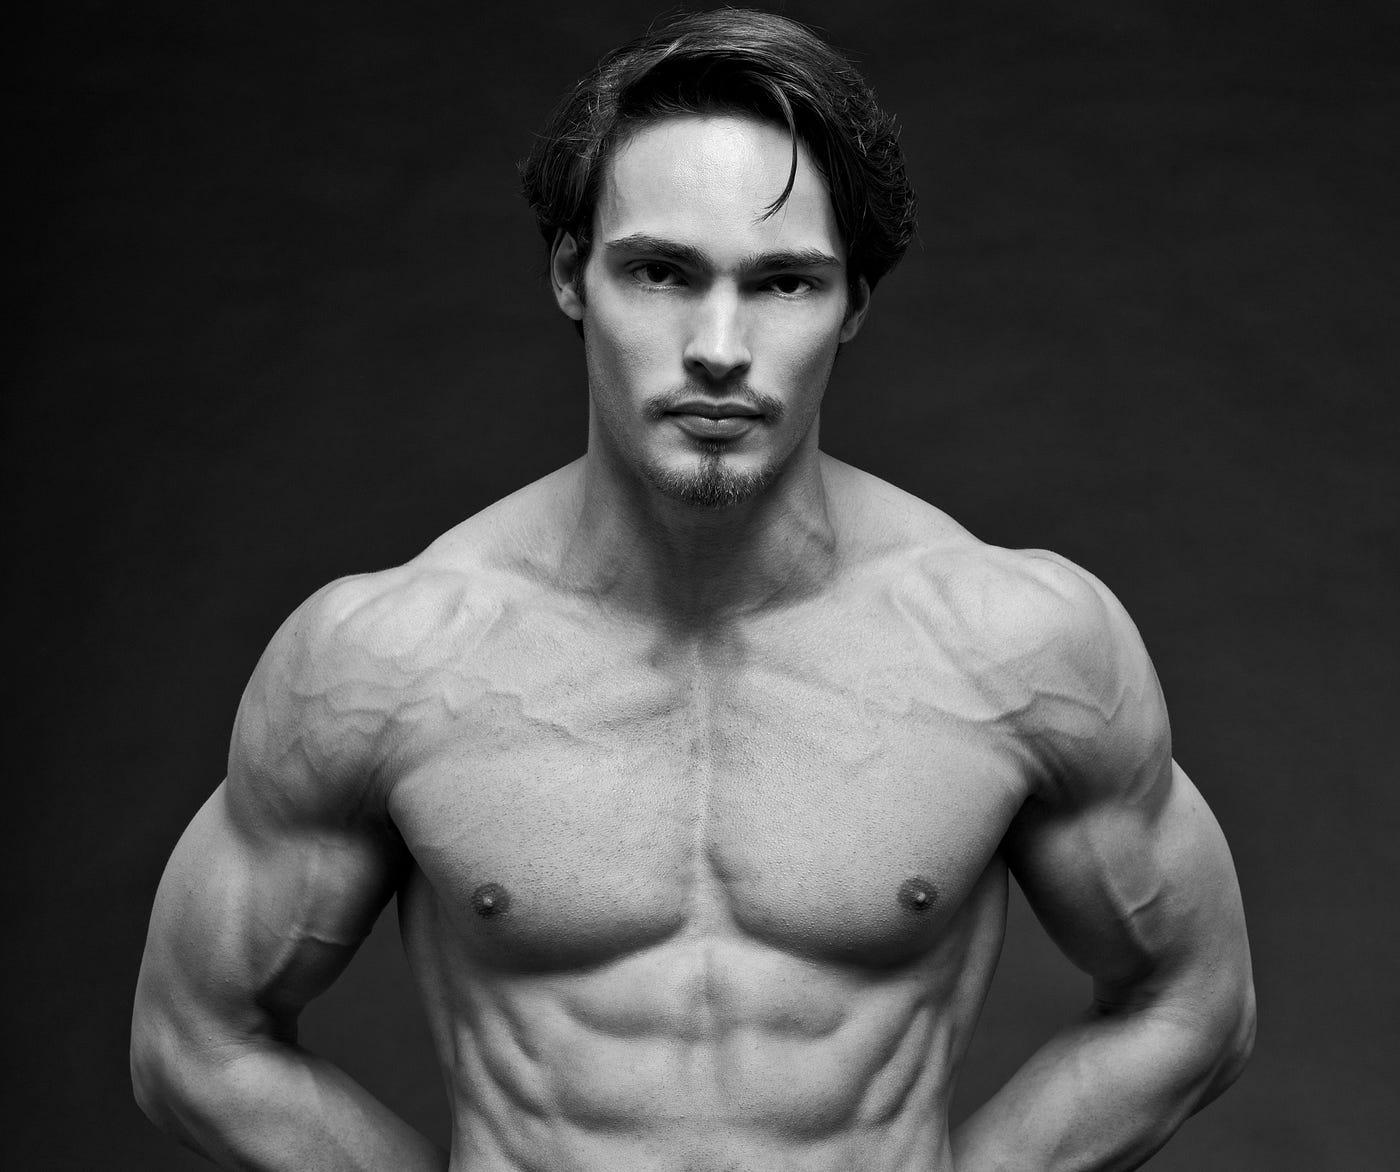 How To Look Like a Bodybuilder Without Using Drugs Better Humans pic